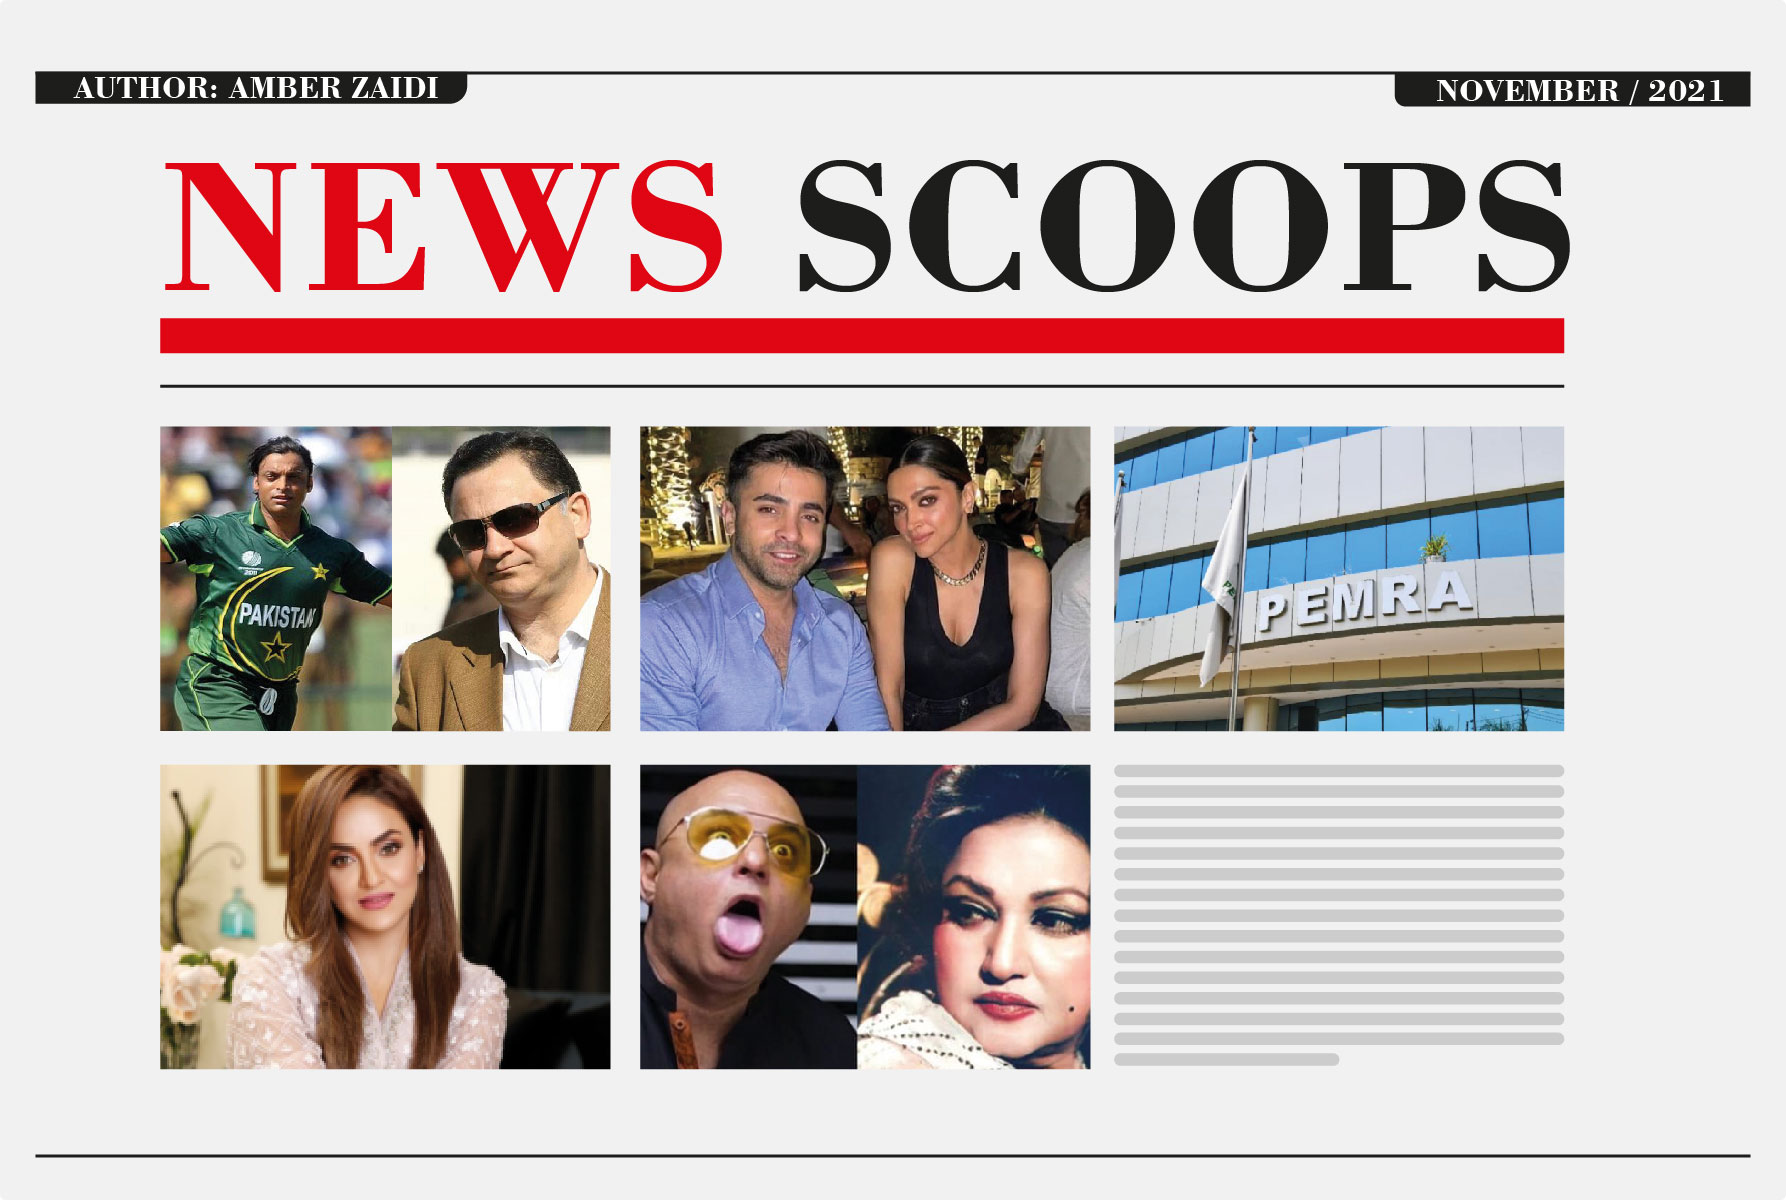 Nov covers _News Scoops